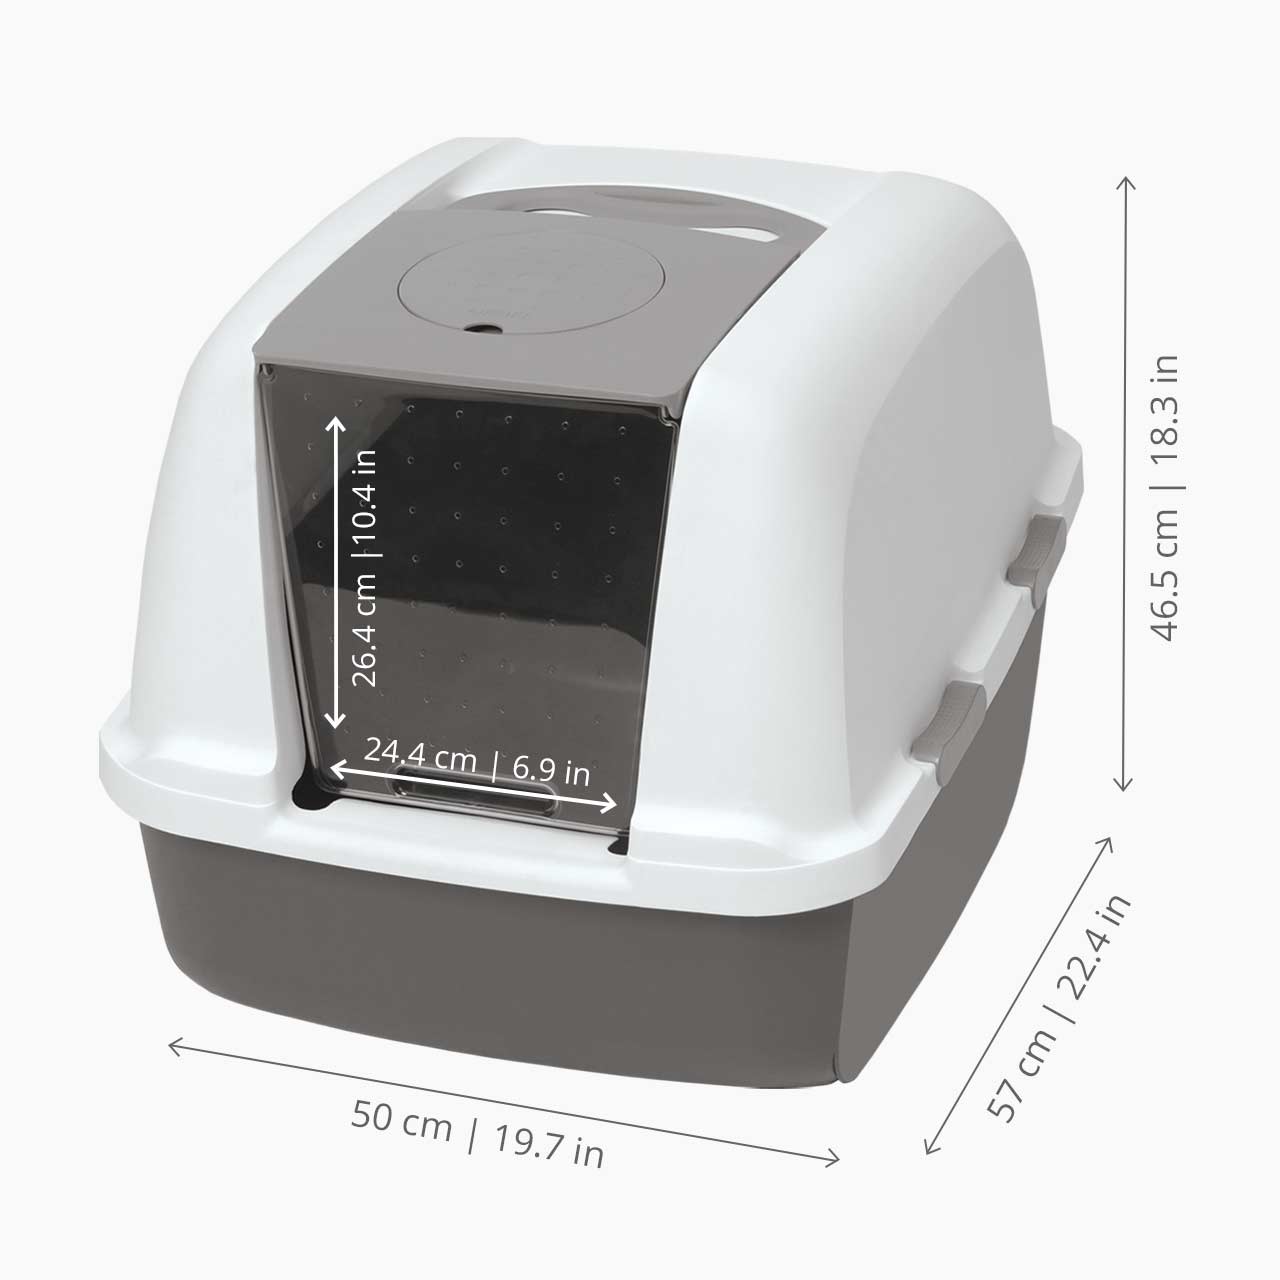 Litter Box with Airsift filter system jumbo size